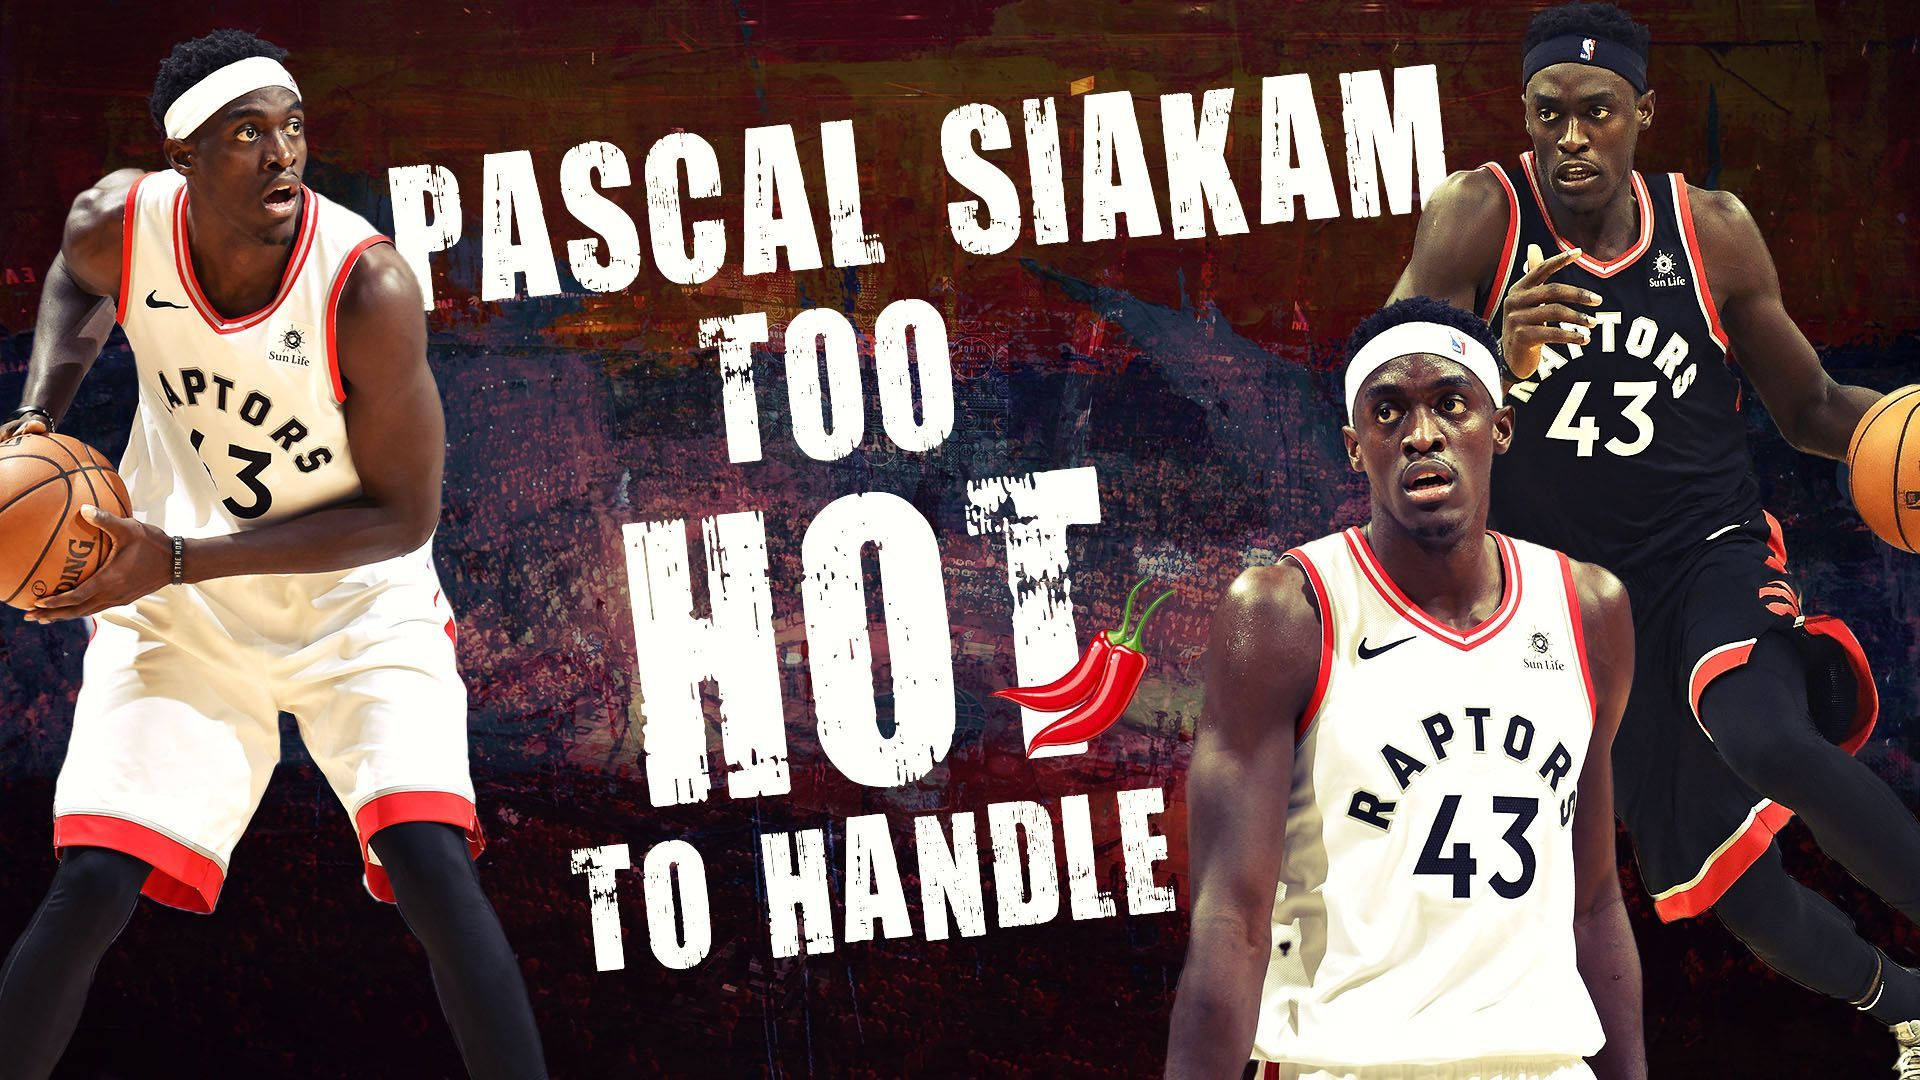 Pascal Siakam Too Hot To Handle Background